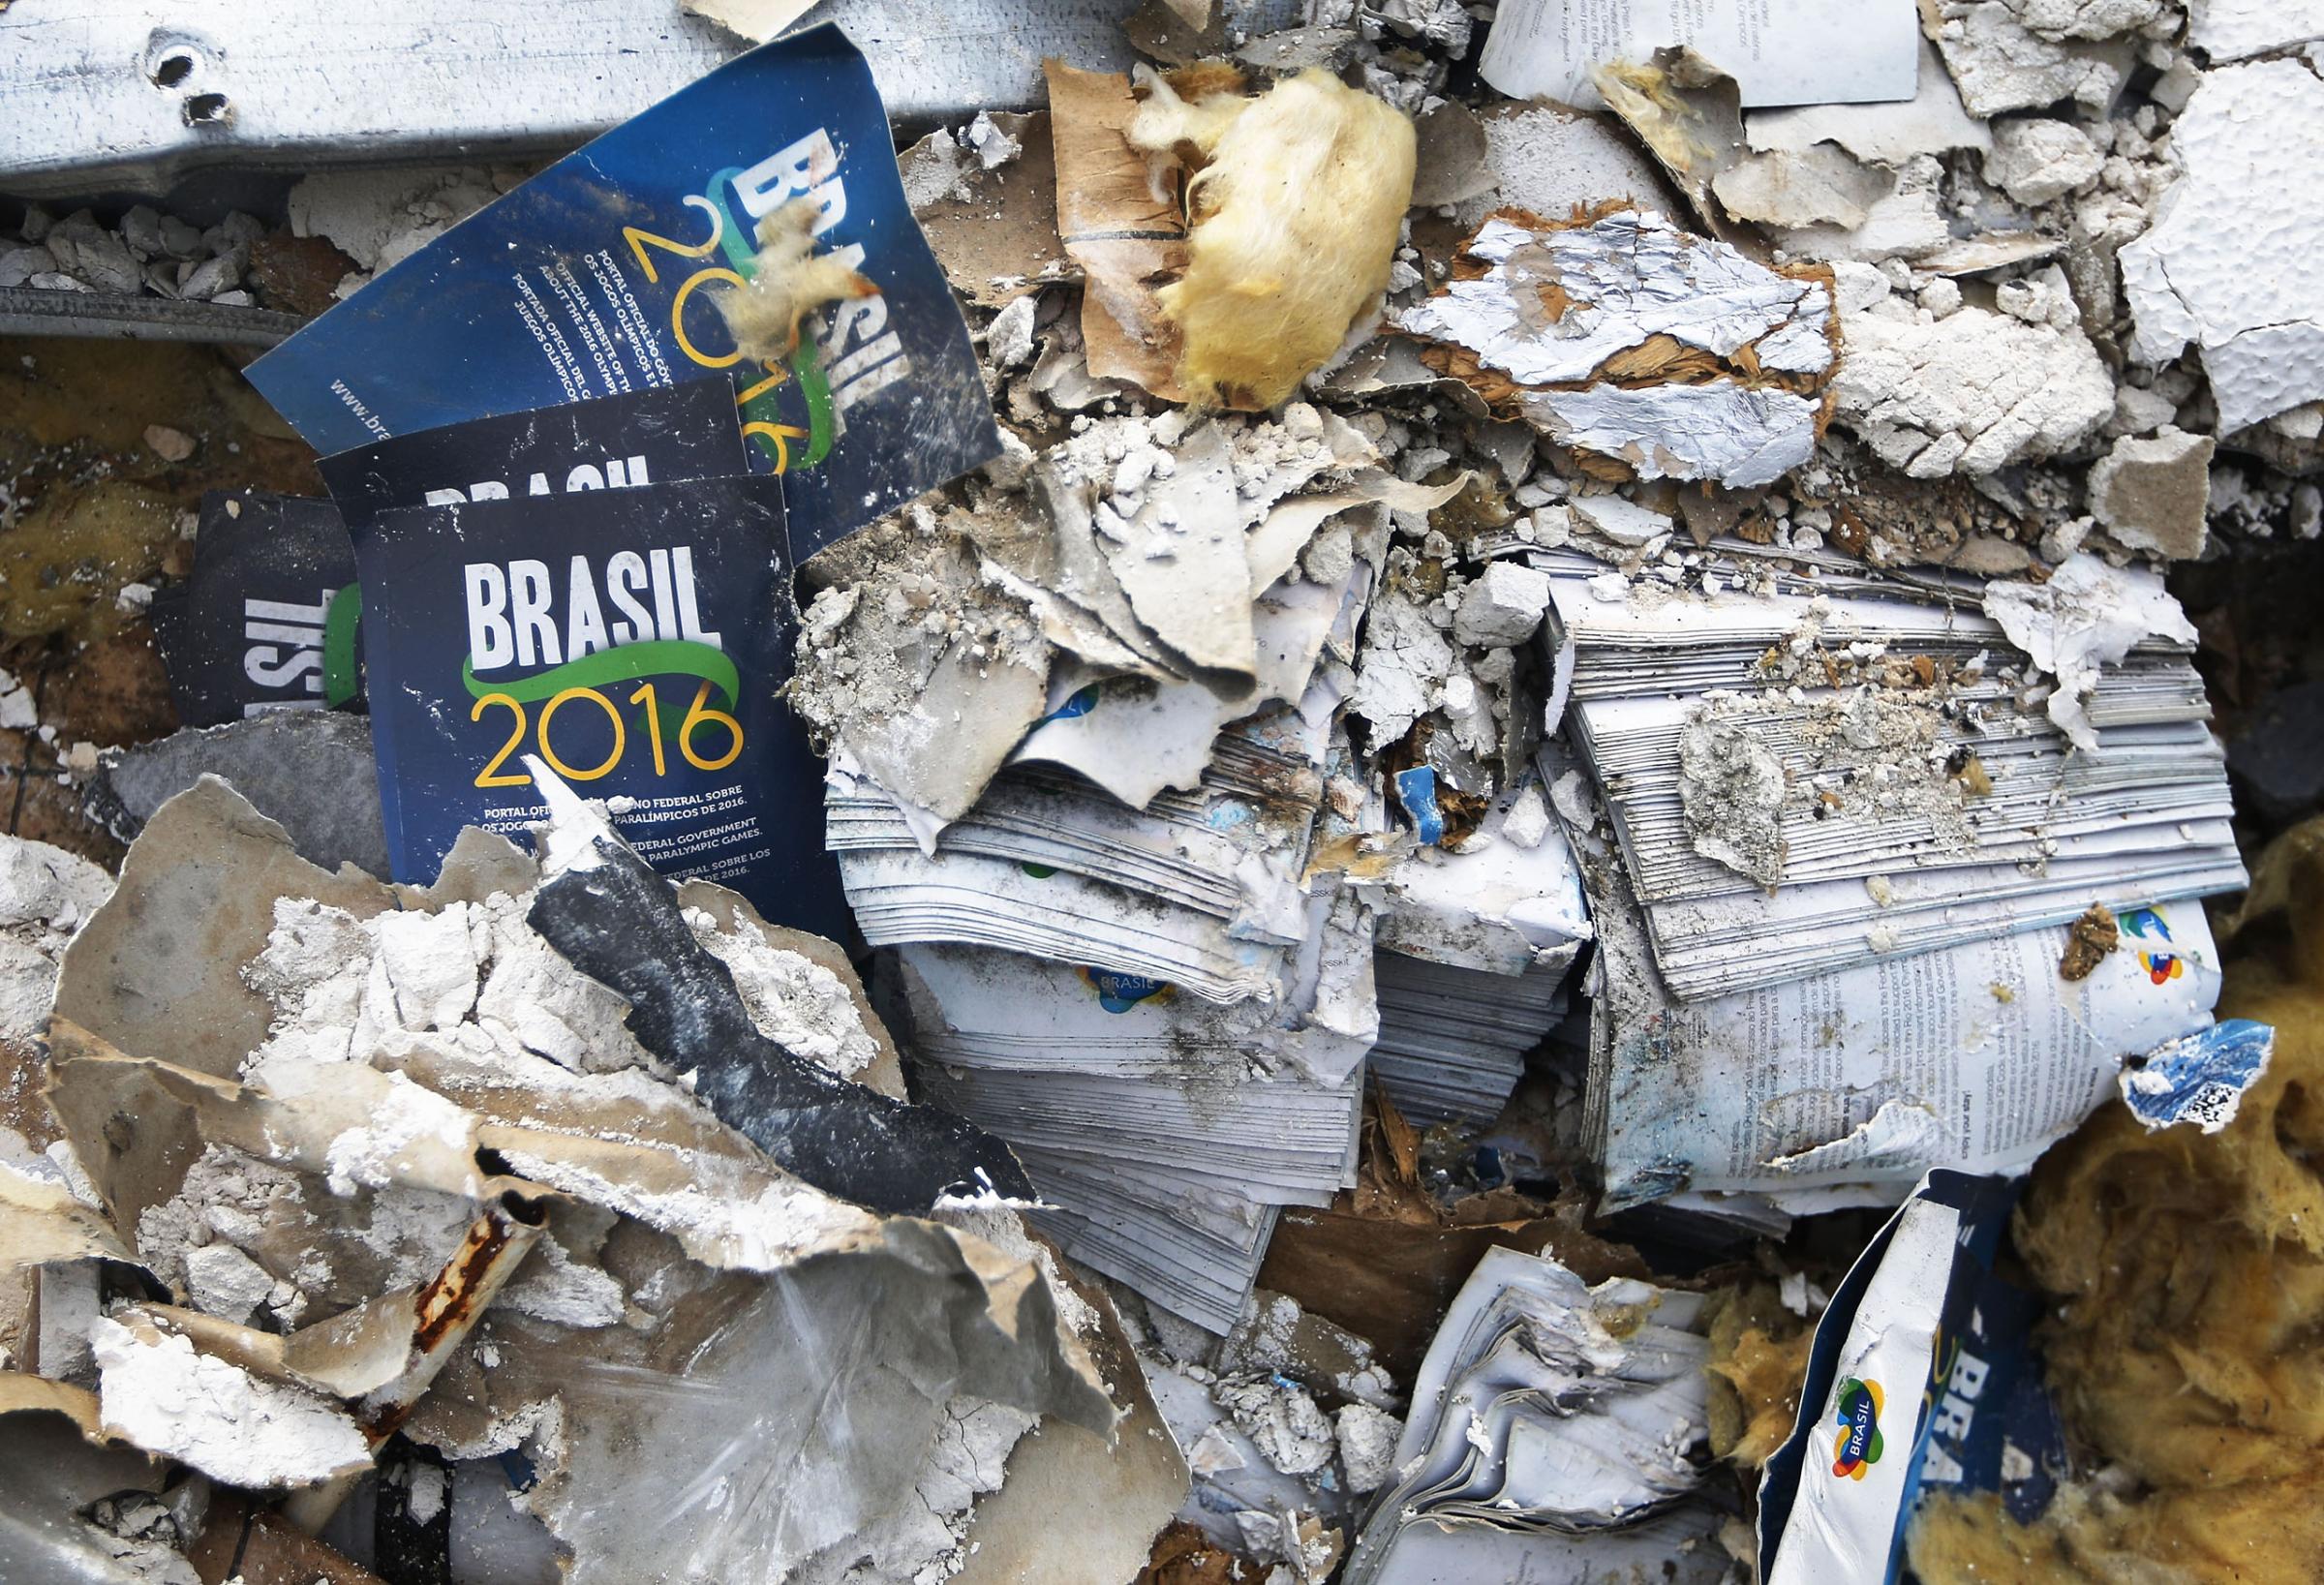 Rio Olympics Media Center Becomes A Health Hazard After Its Destruction